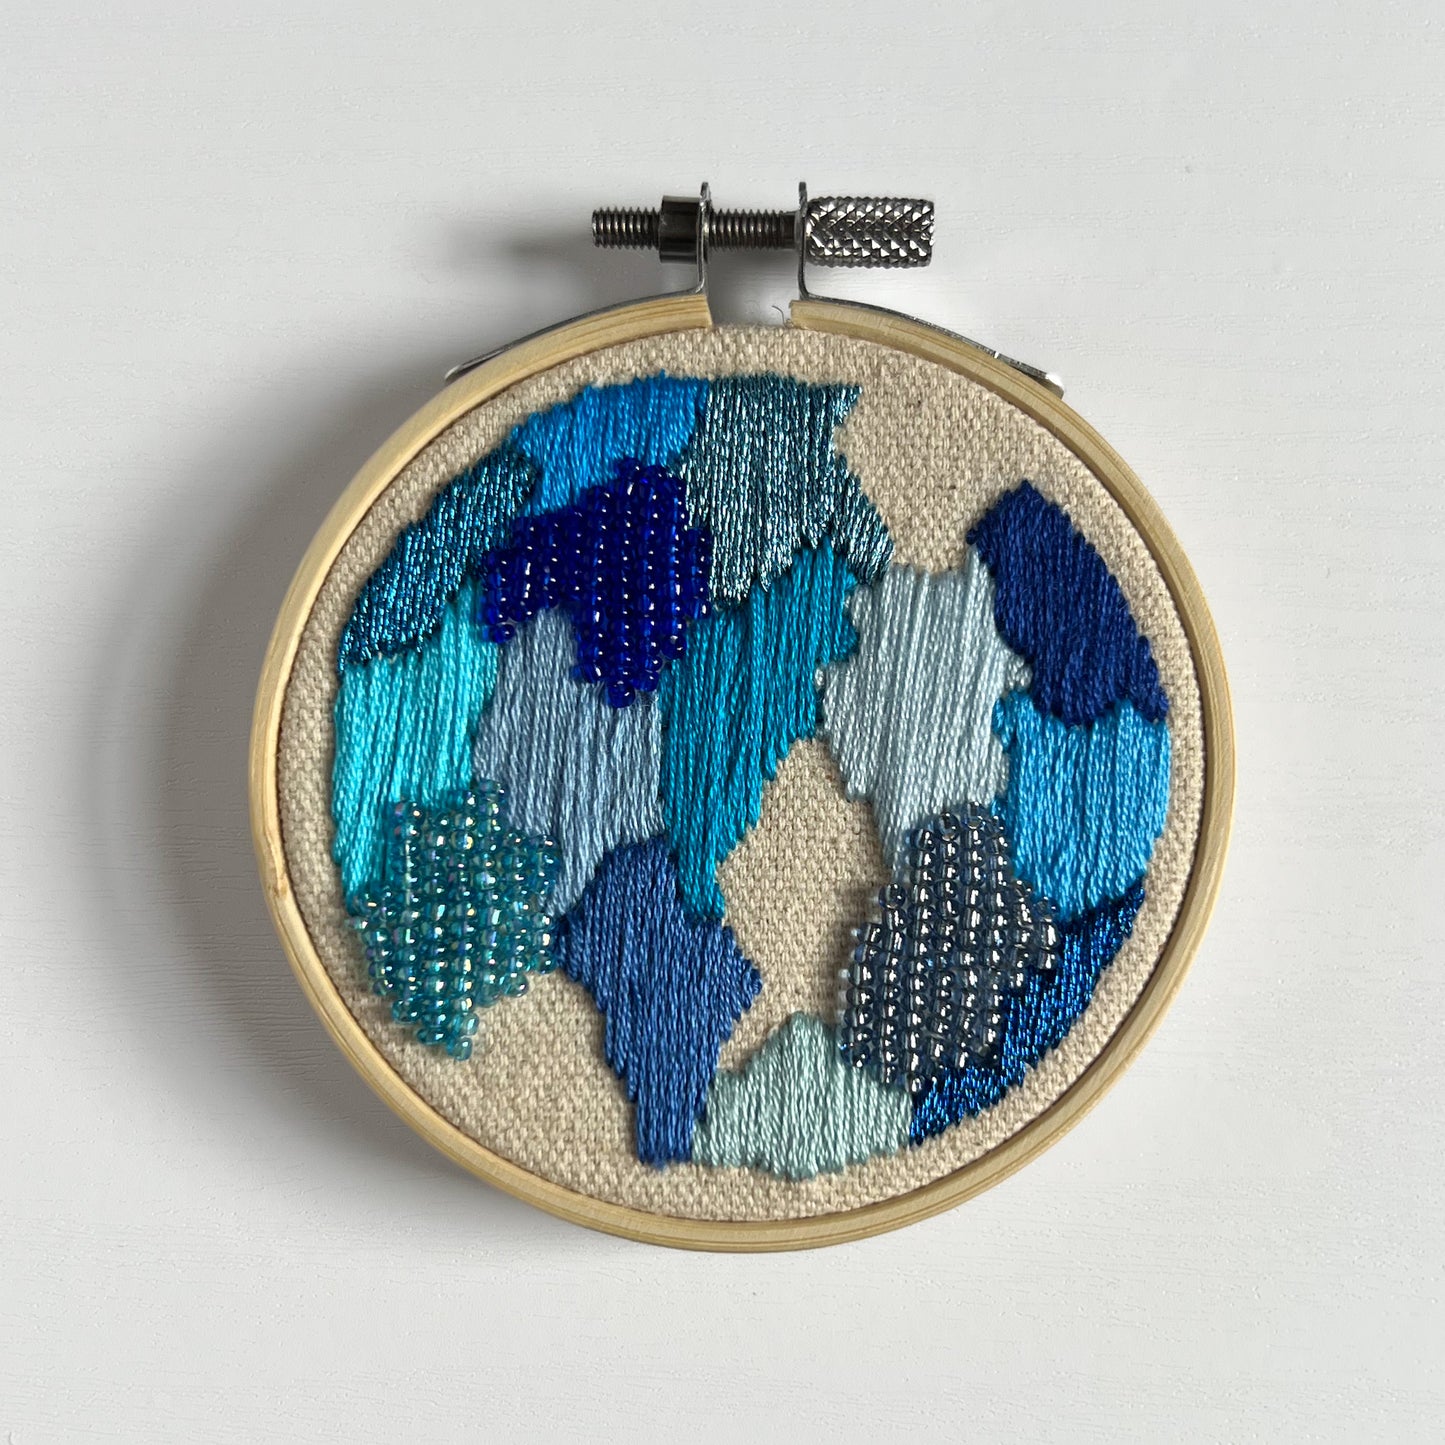 Mini Patchwork Hoops - Embroidery